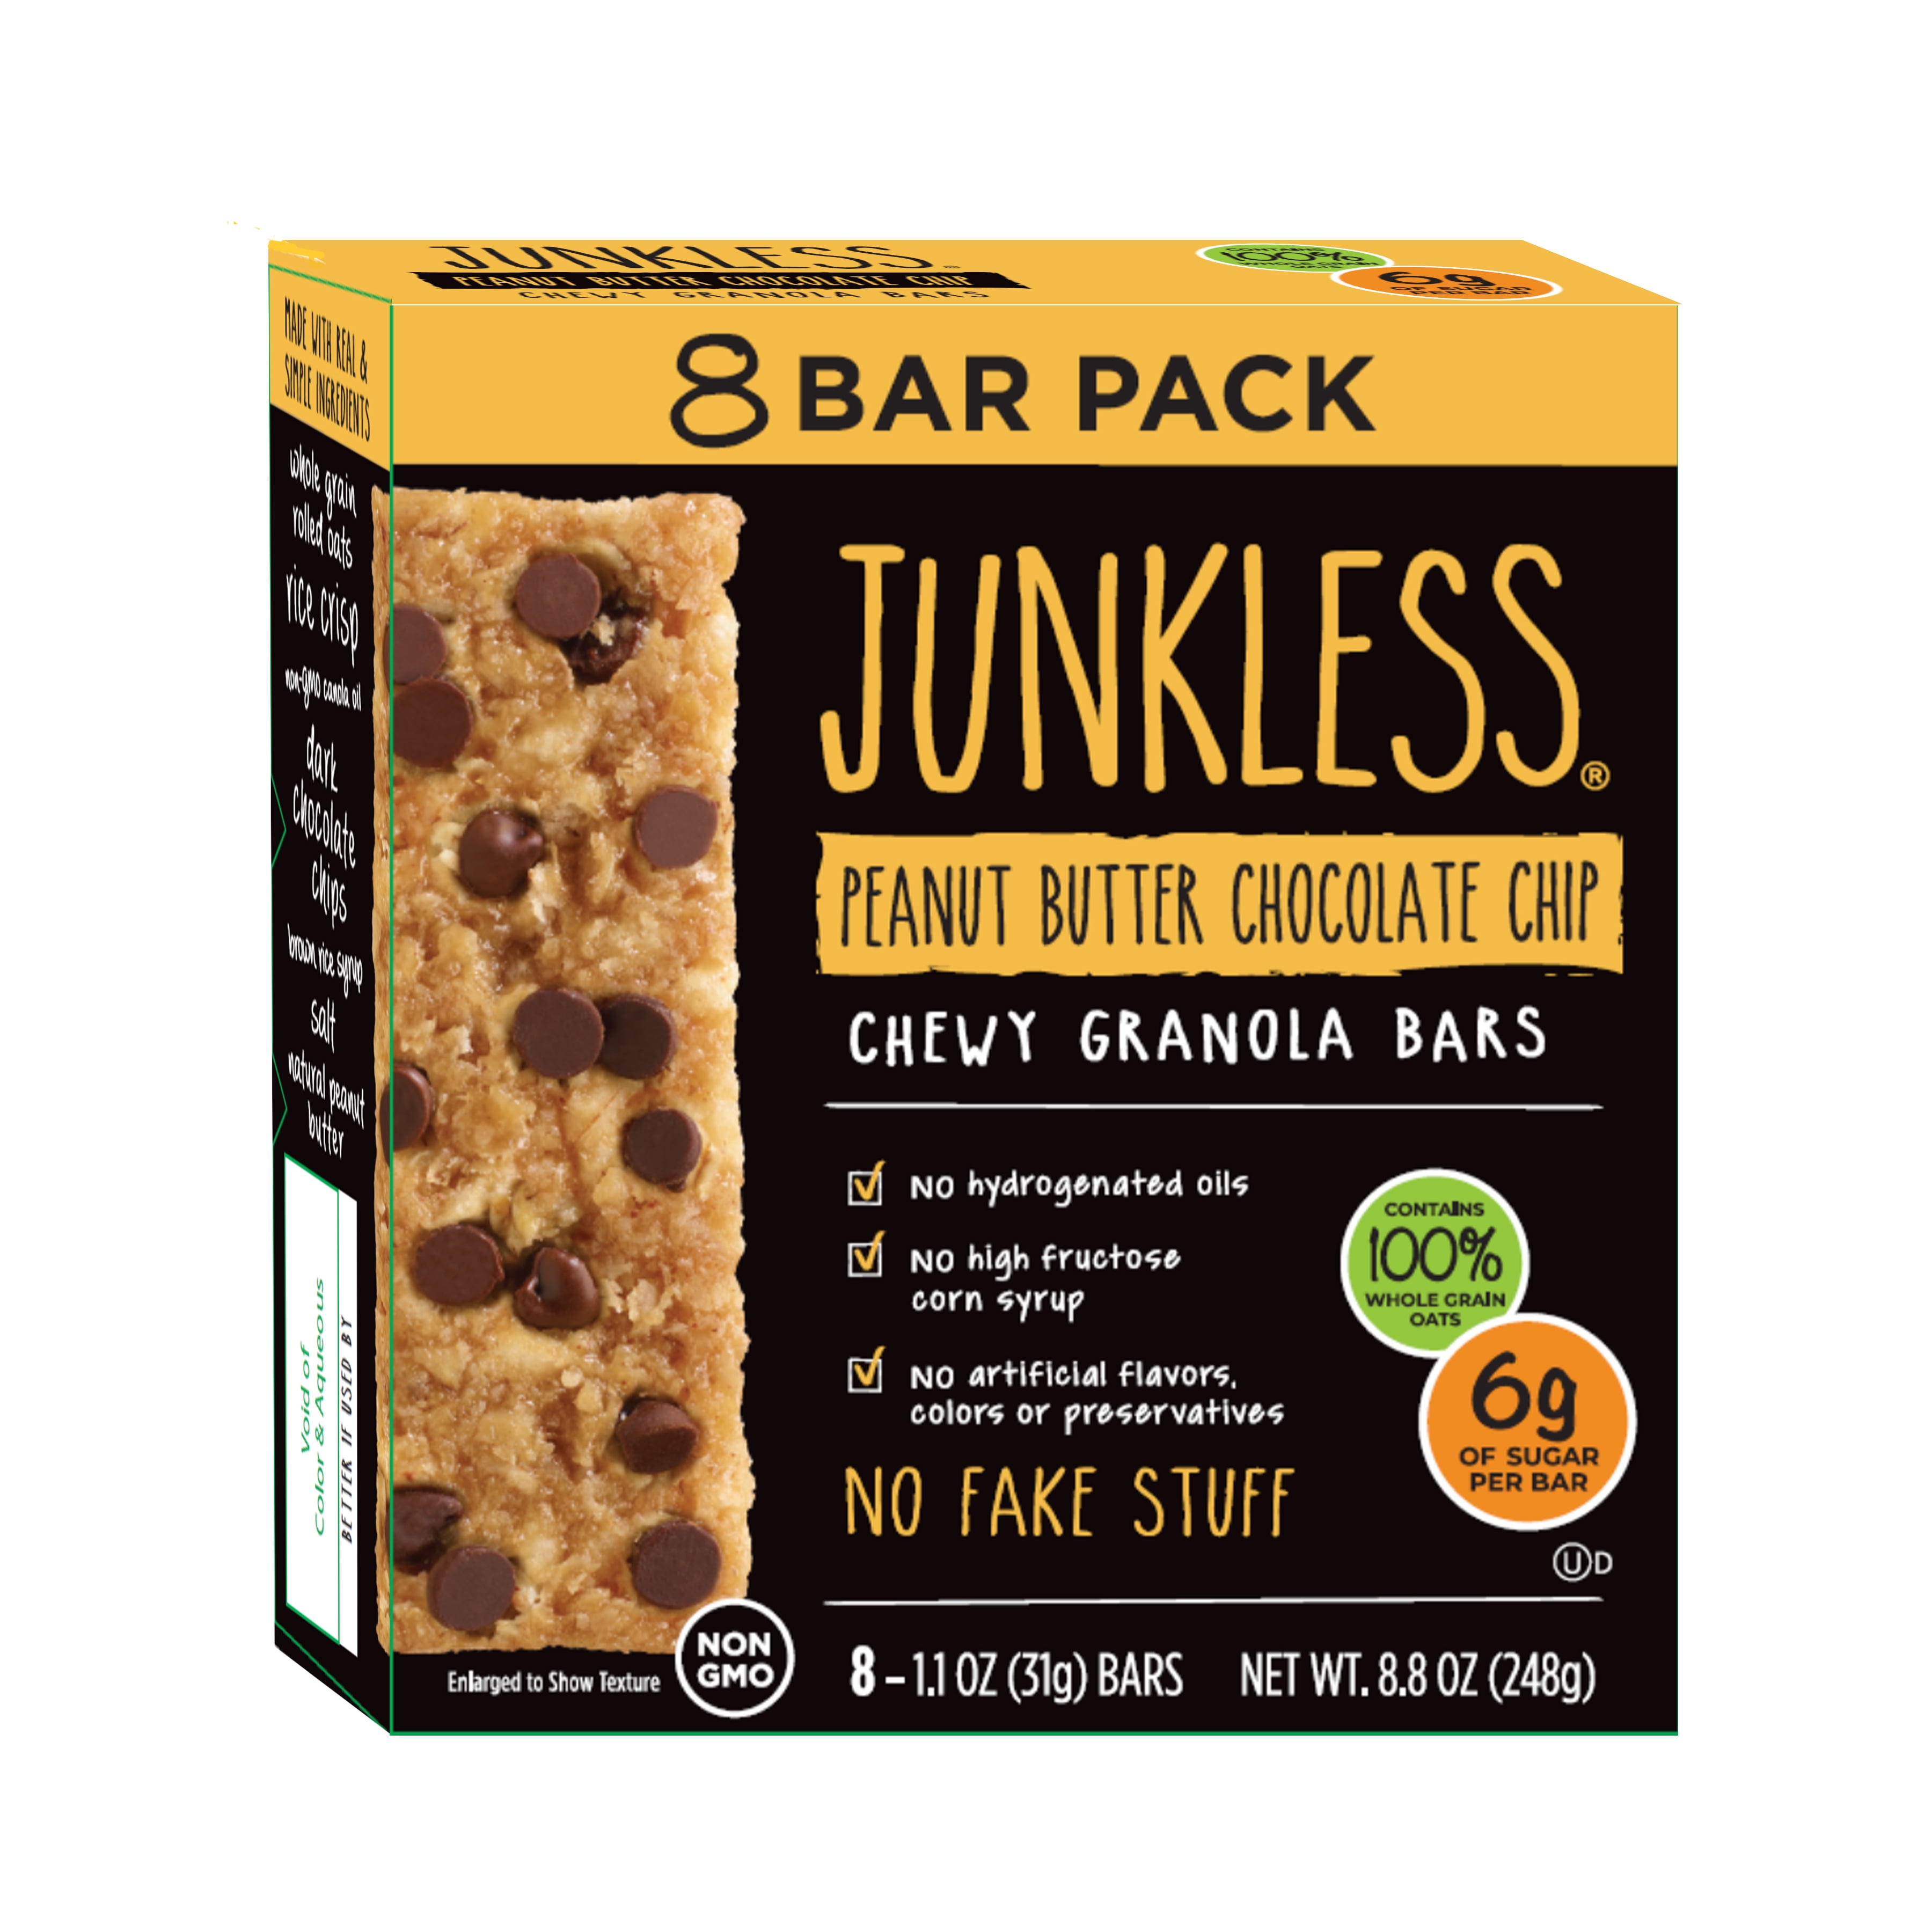 JUNKLESS Non-GMO Delicious Chewy Peanut Butter Chocolate Chip Granola Bars, 8 Ct, 1.1 oz